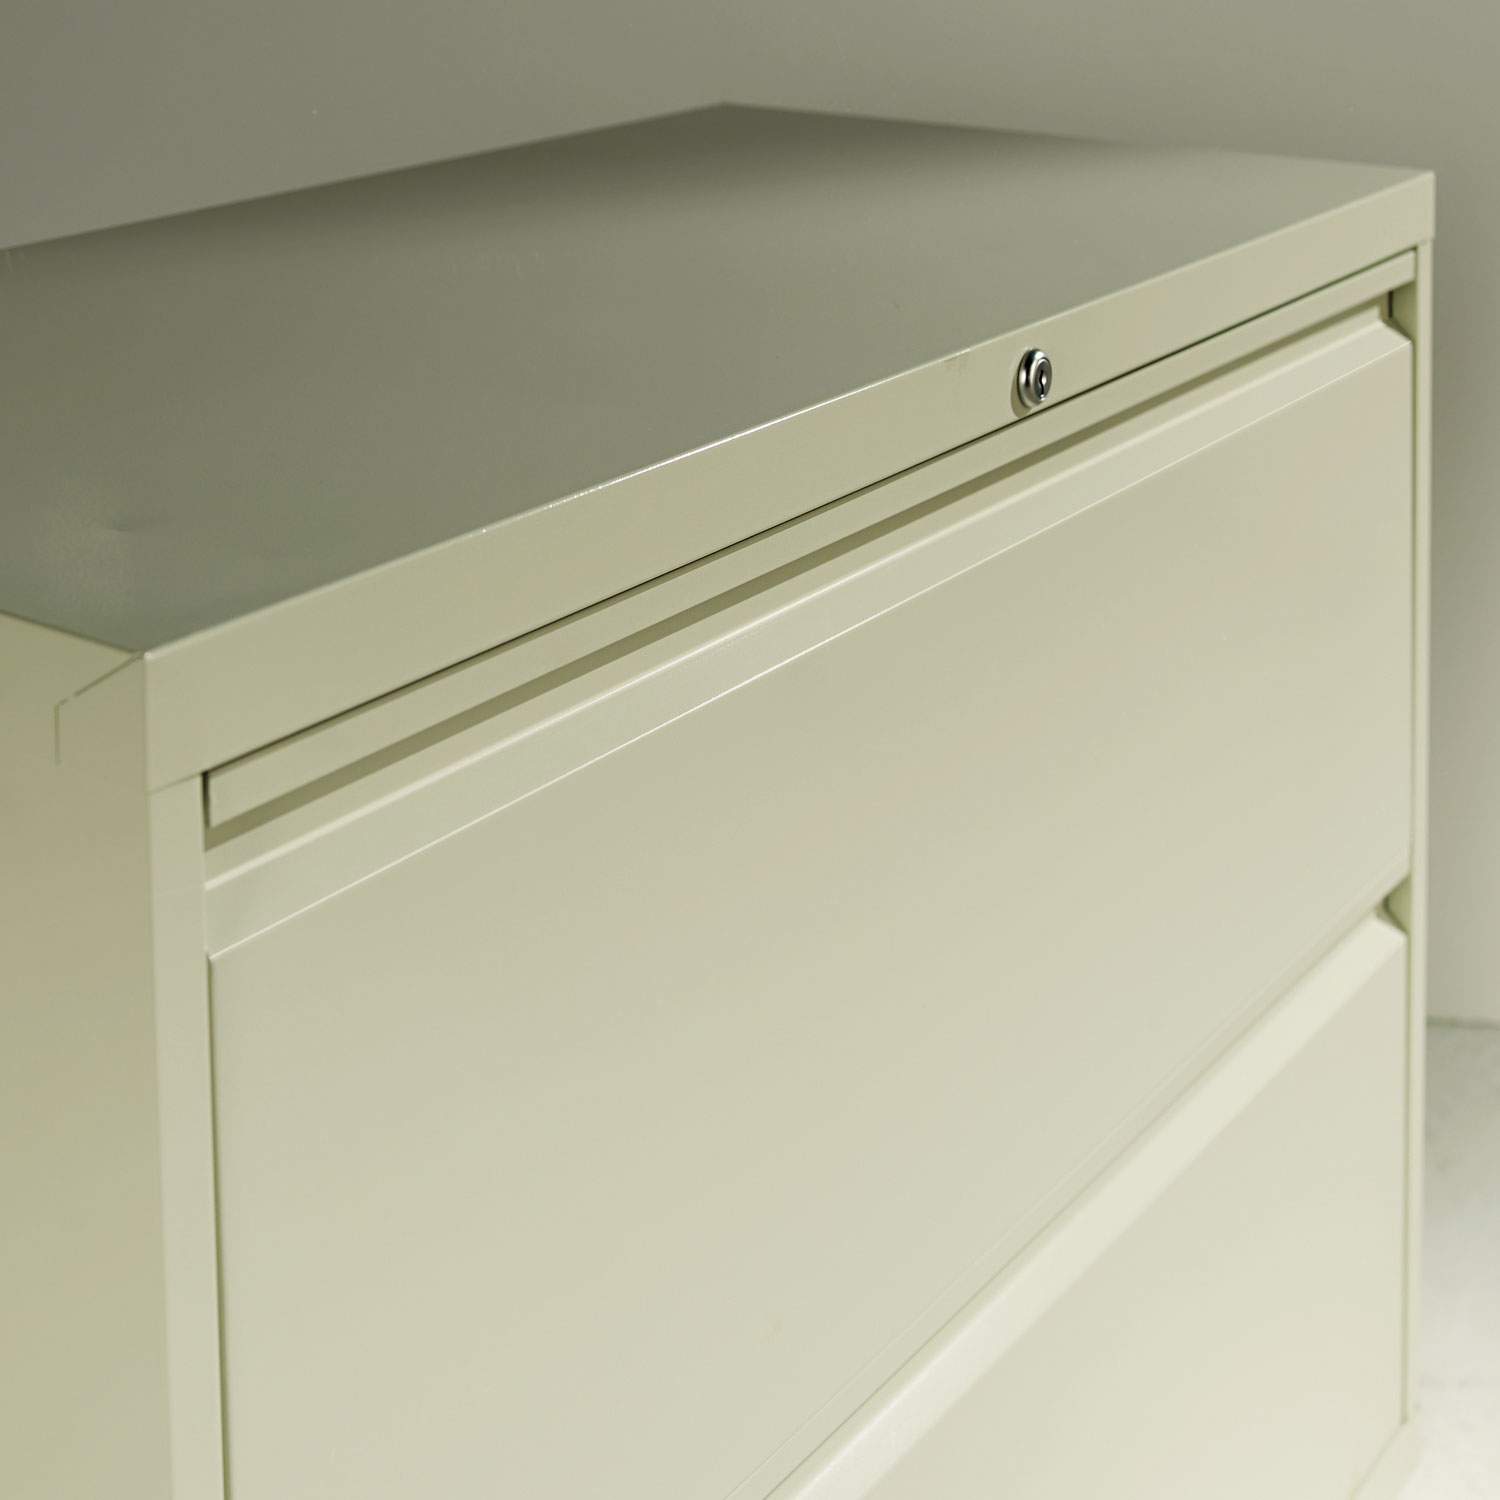 Four-Drawer Lateral File Cabinet, 30w x 19-1/4d x 53-1/4h, Light Gray